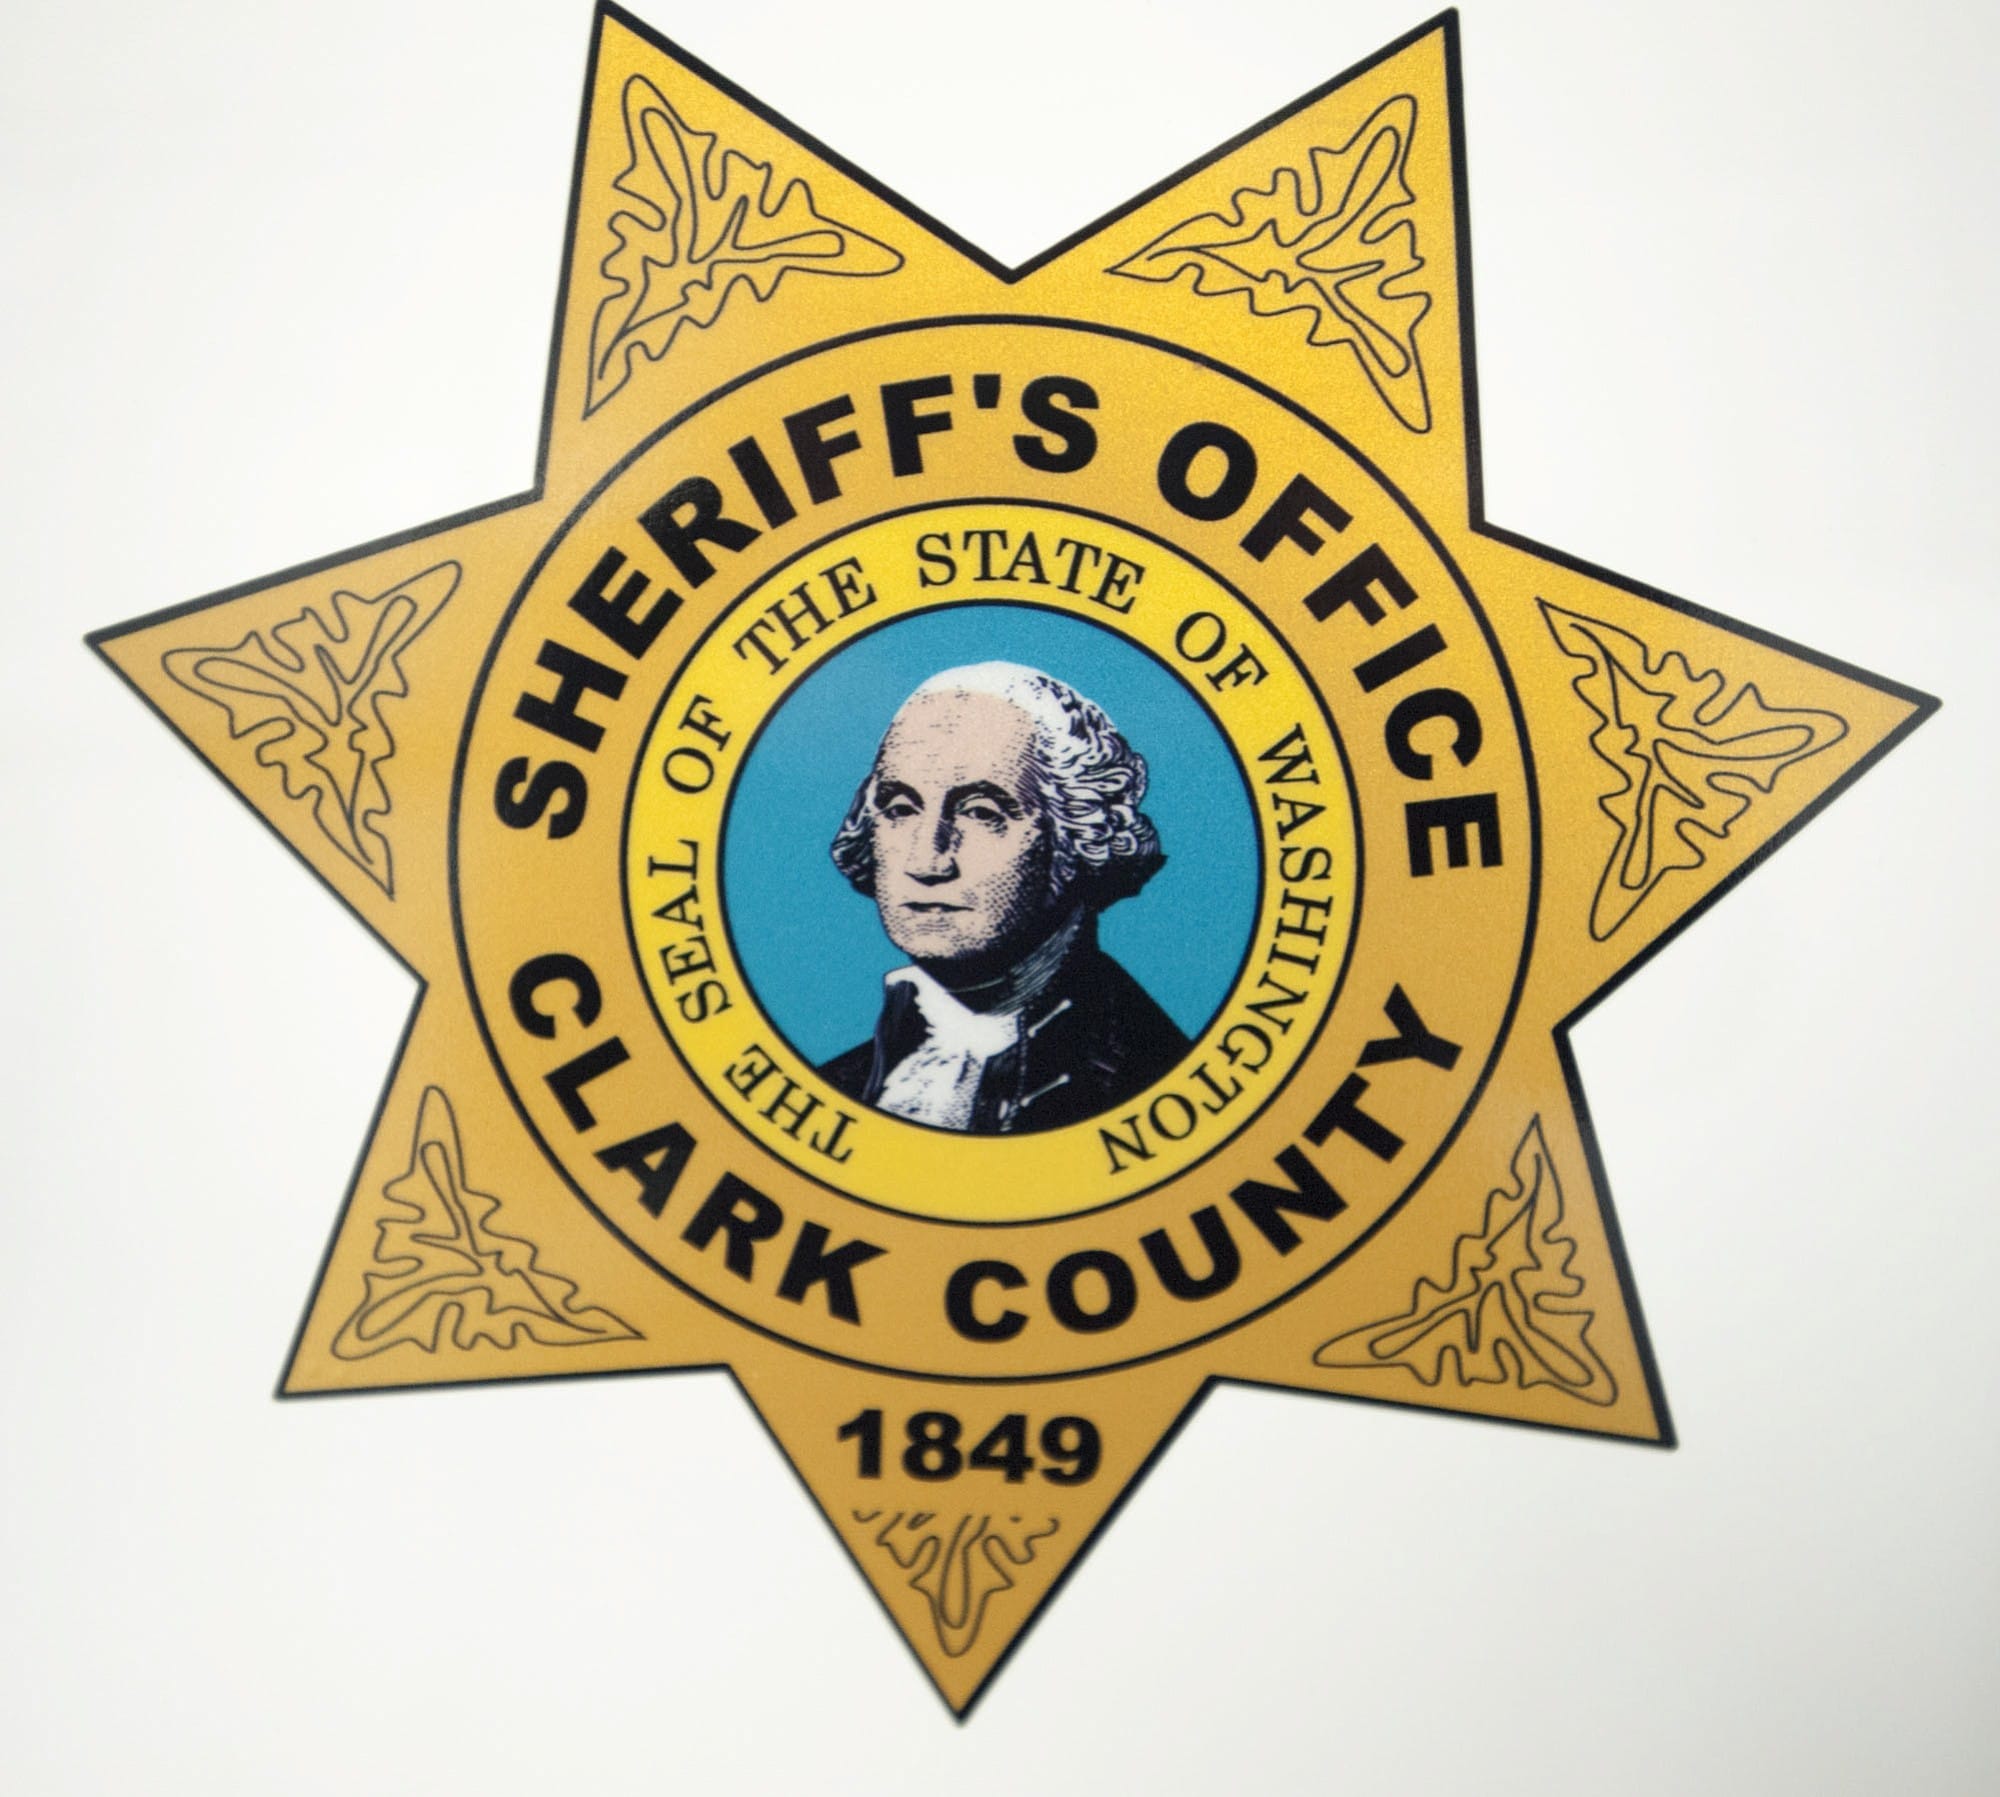 The Clark County Sheriff's Office seven-point star is part of the new decals being applied to the agency's patrol vehicles.